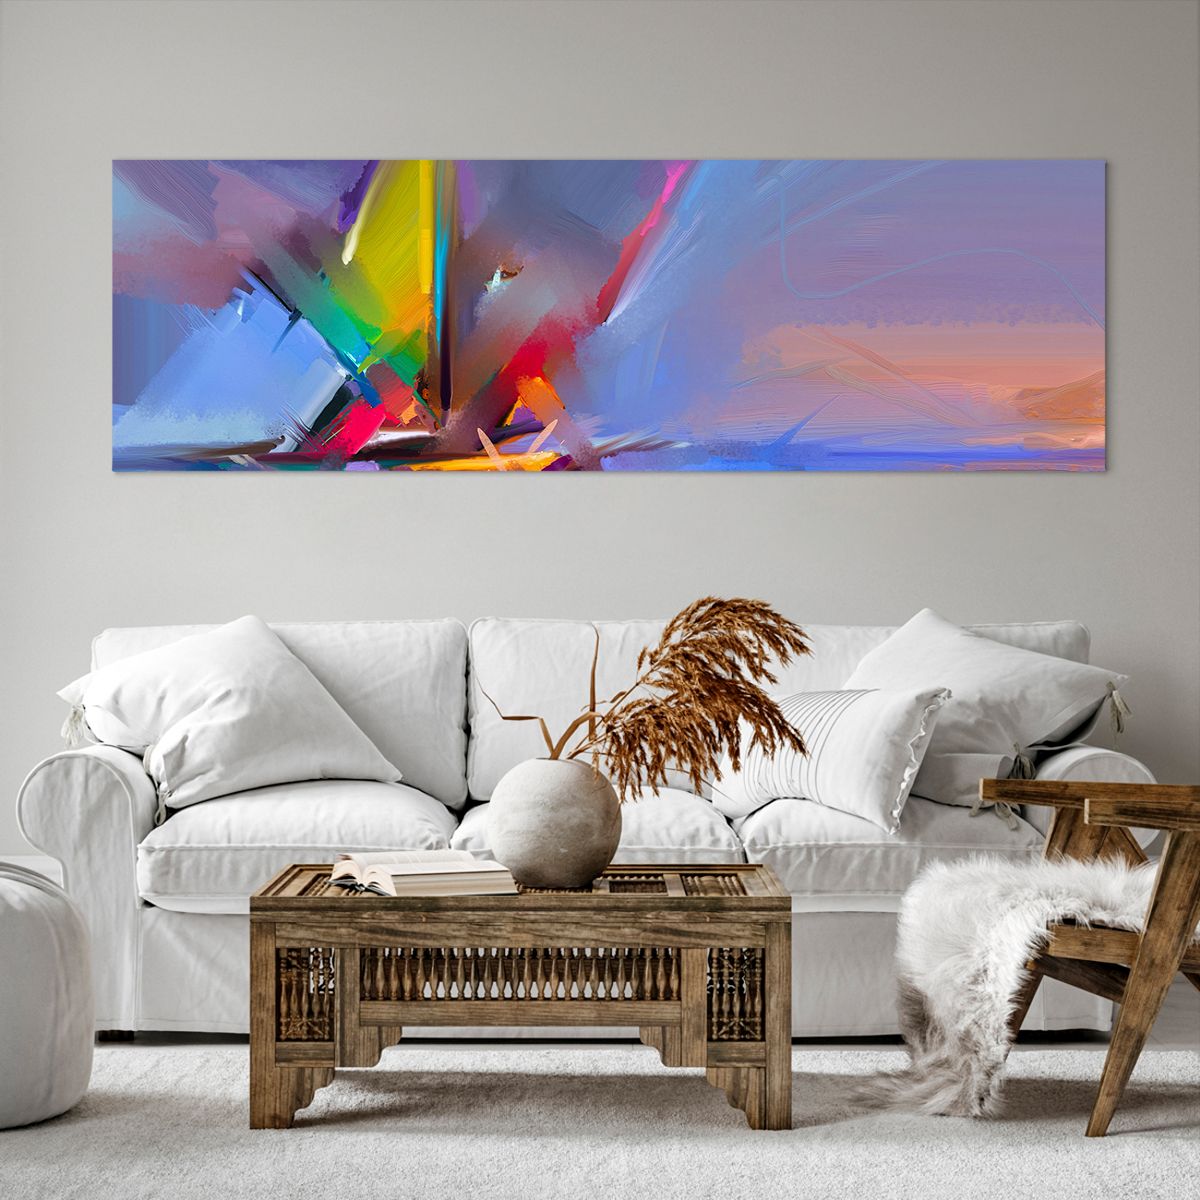 Impression sur toile Abstraction, Impression sur toile Art, Impression sur toile Voilier, Impression sur toile Art Moderne, Impression sur toile Peinture